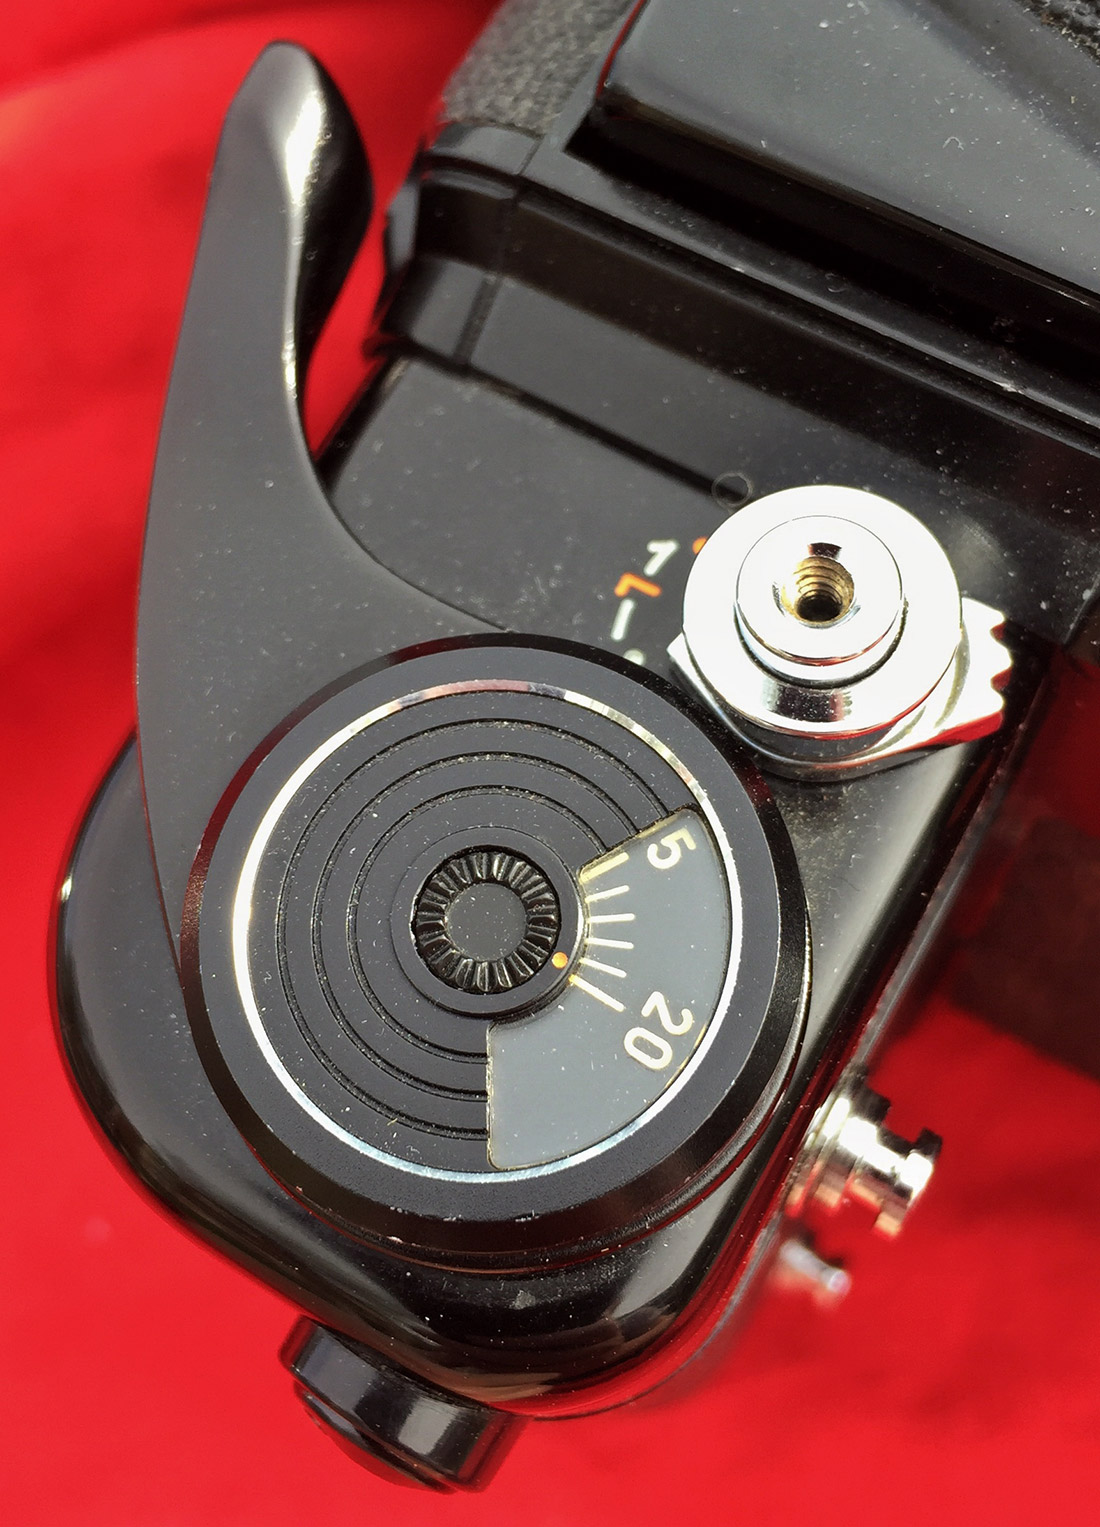 P67 advance, frame counter and shutter release